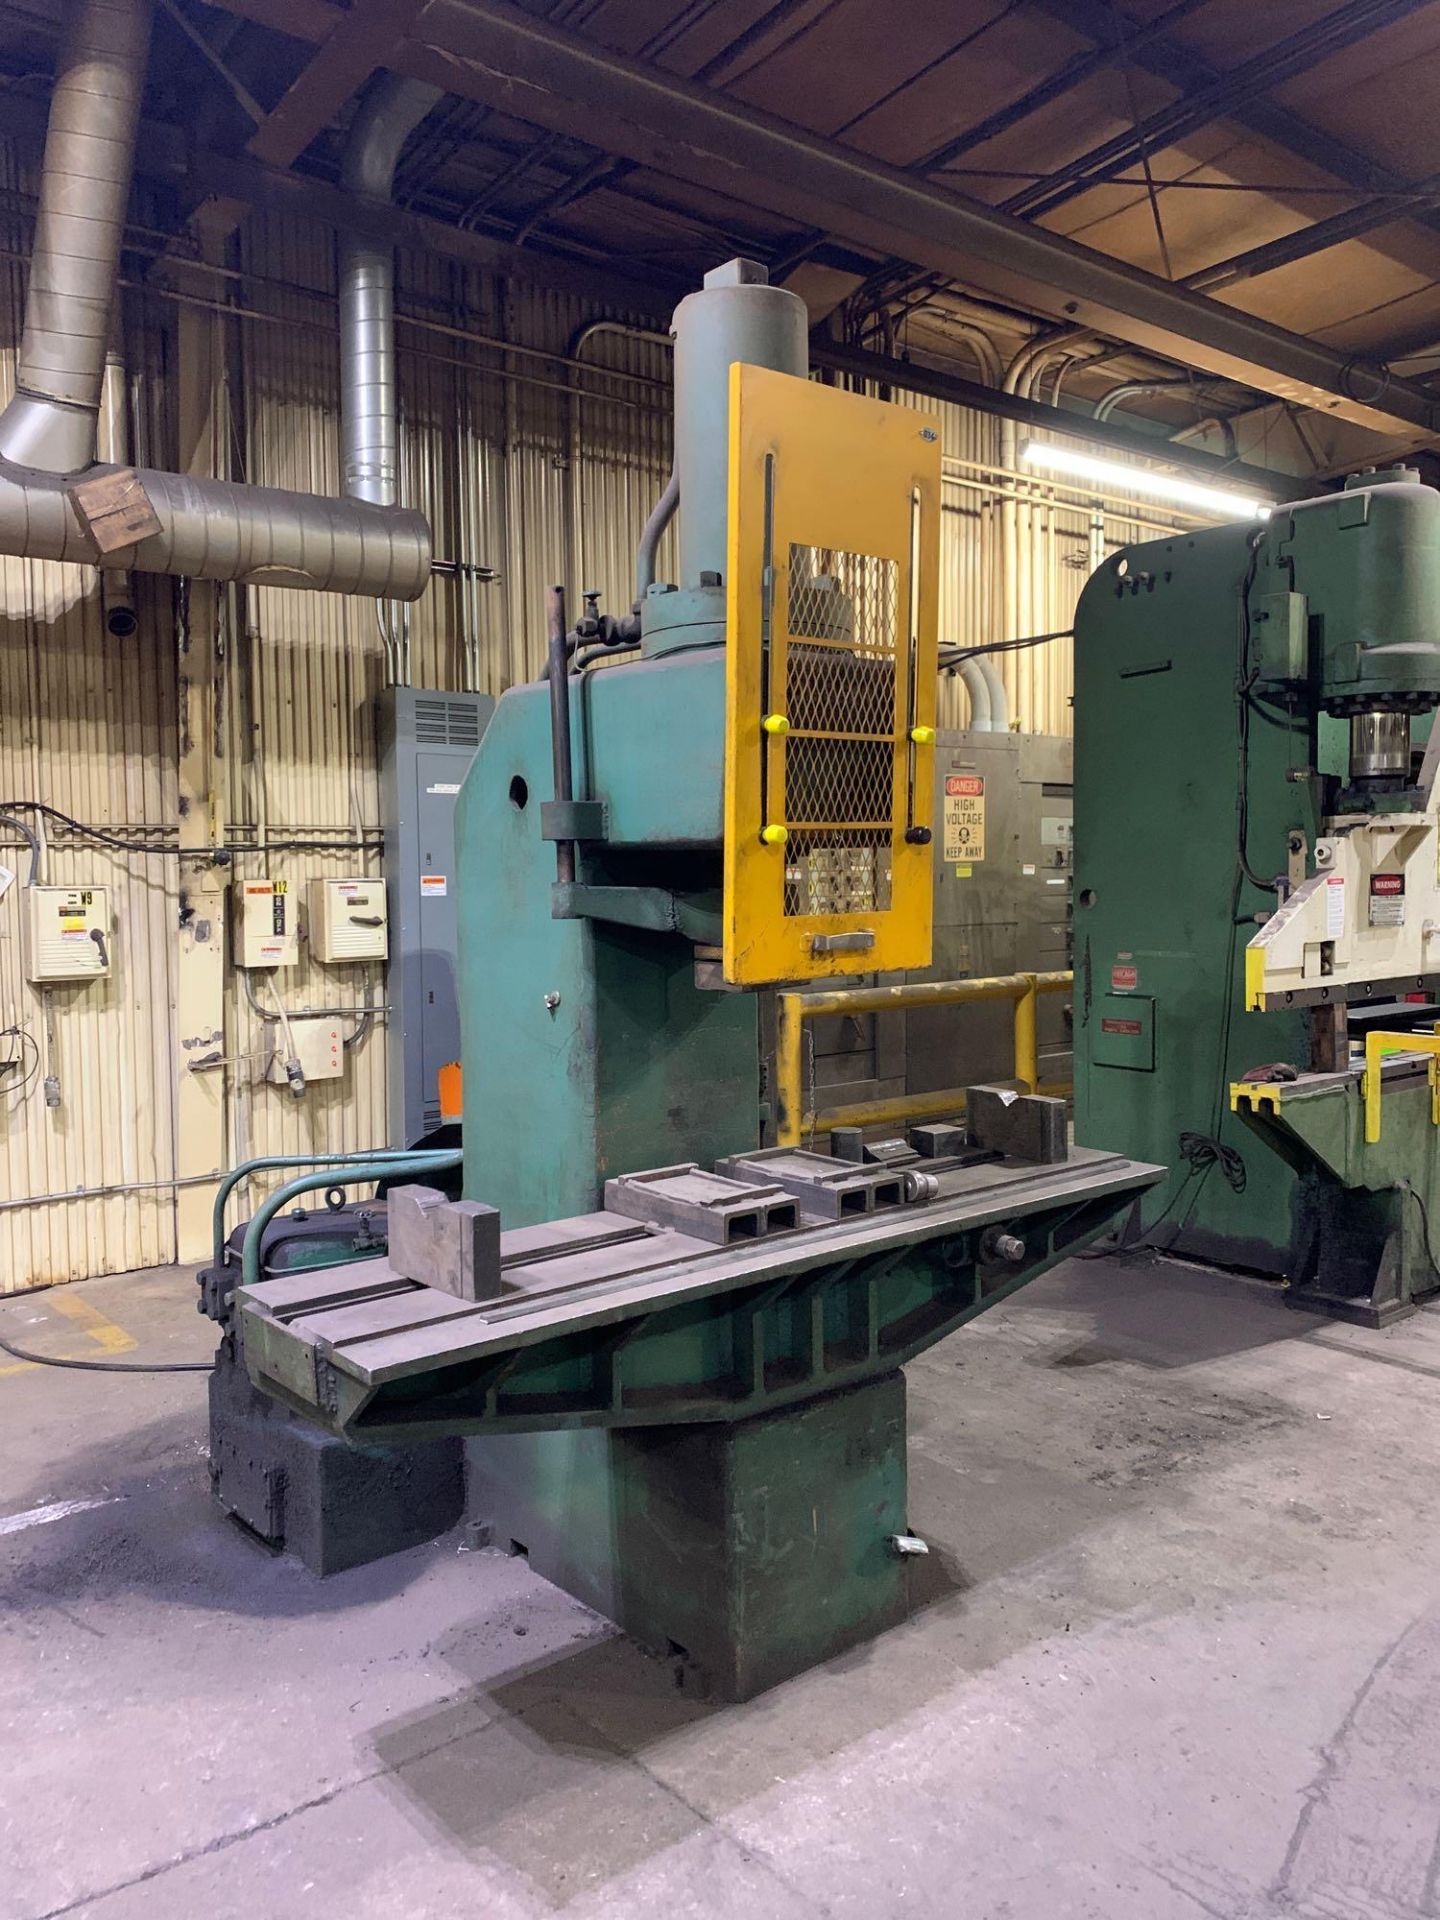 Oilgear Model DH-2017 50 Ton Hydraulic Straightening Press Serial Number 33876 - Image 3 of 16